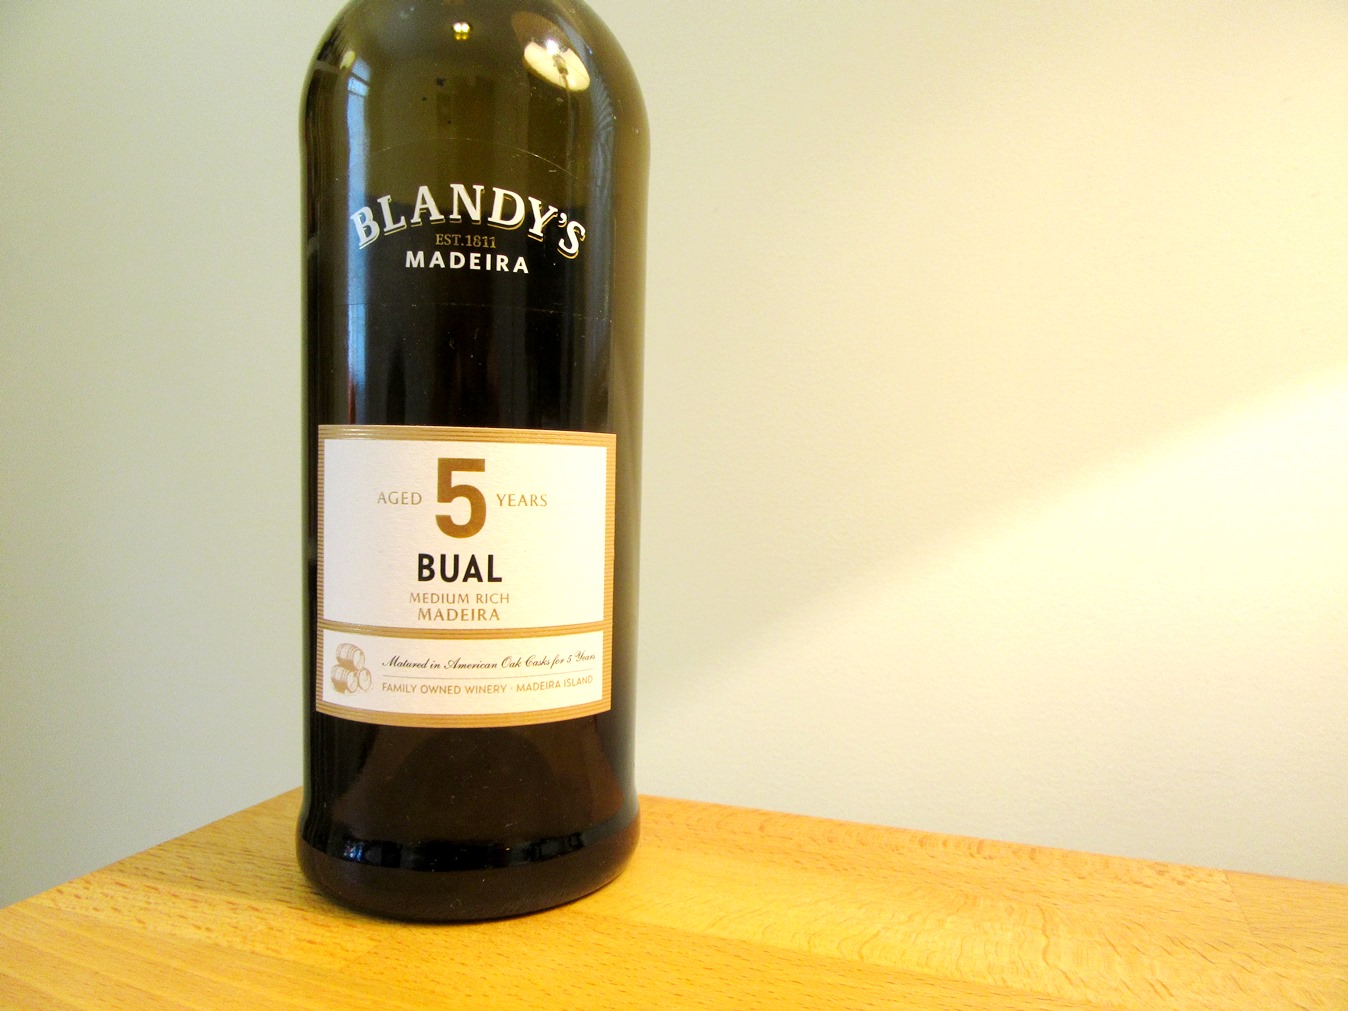 Blandy’s, 5 Years Old Bual Madeira, Portugal, Wine Casual